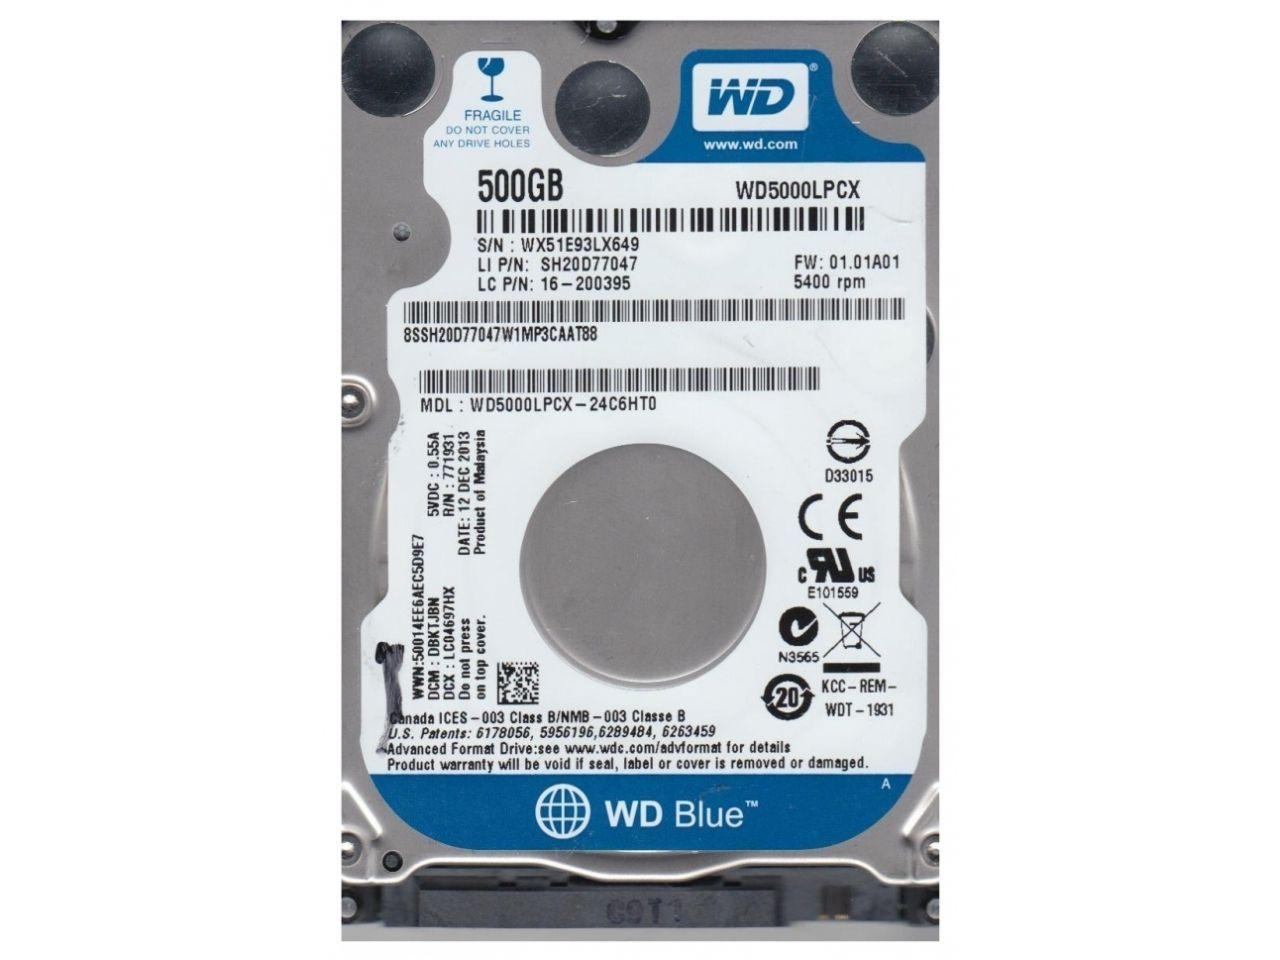 Ổ cứng HDD WD Blue WD5000LPVX 500GB